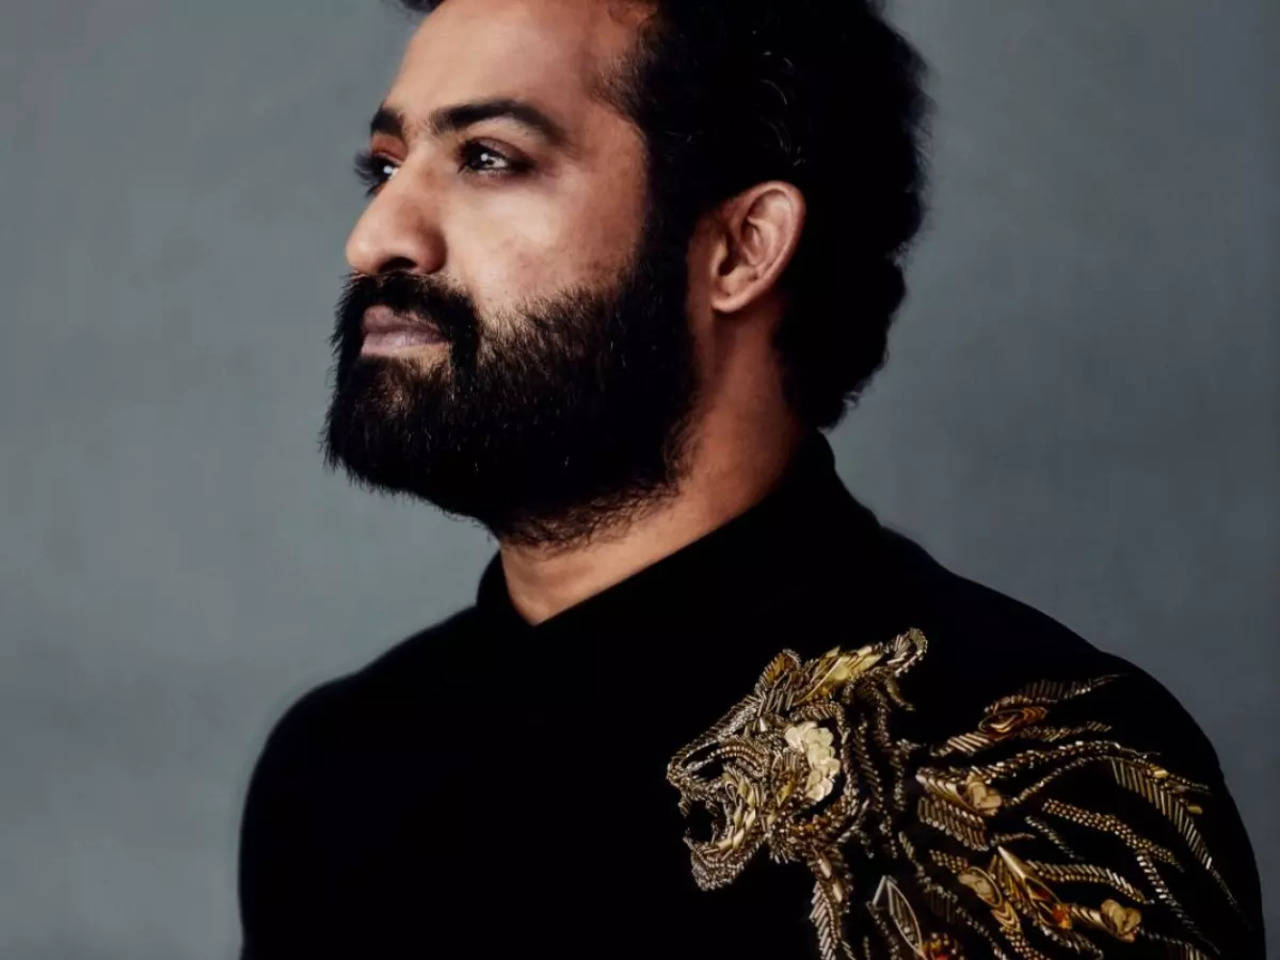 JR NTR talks about having a Tiger on his Oscar outfit to represent ...